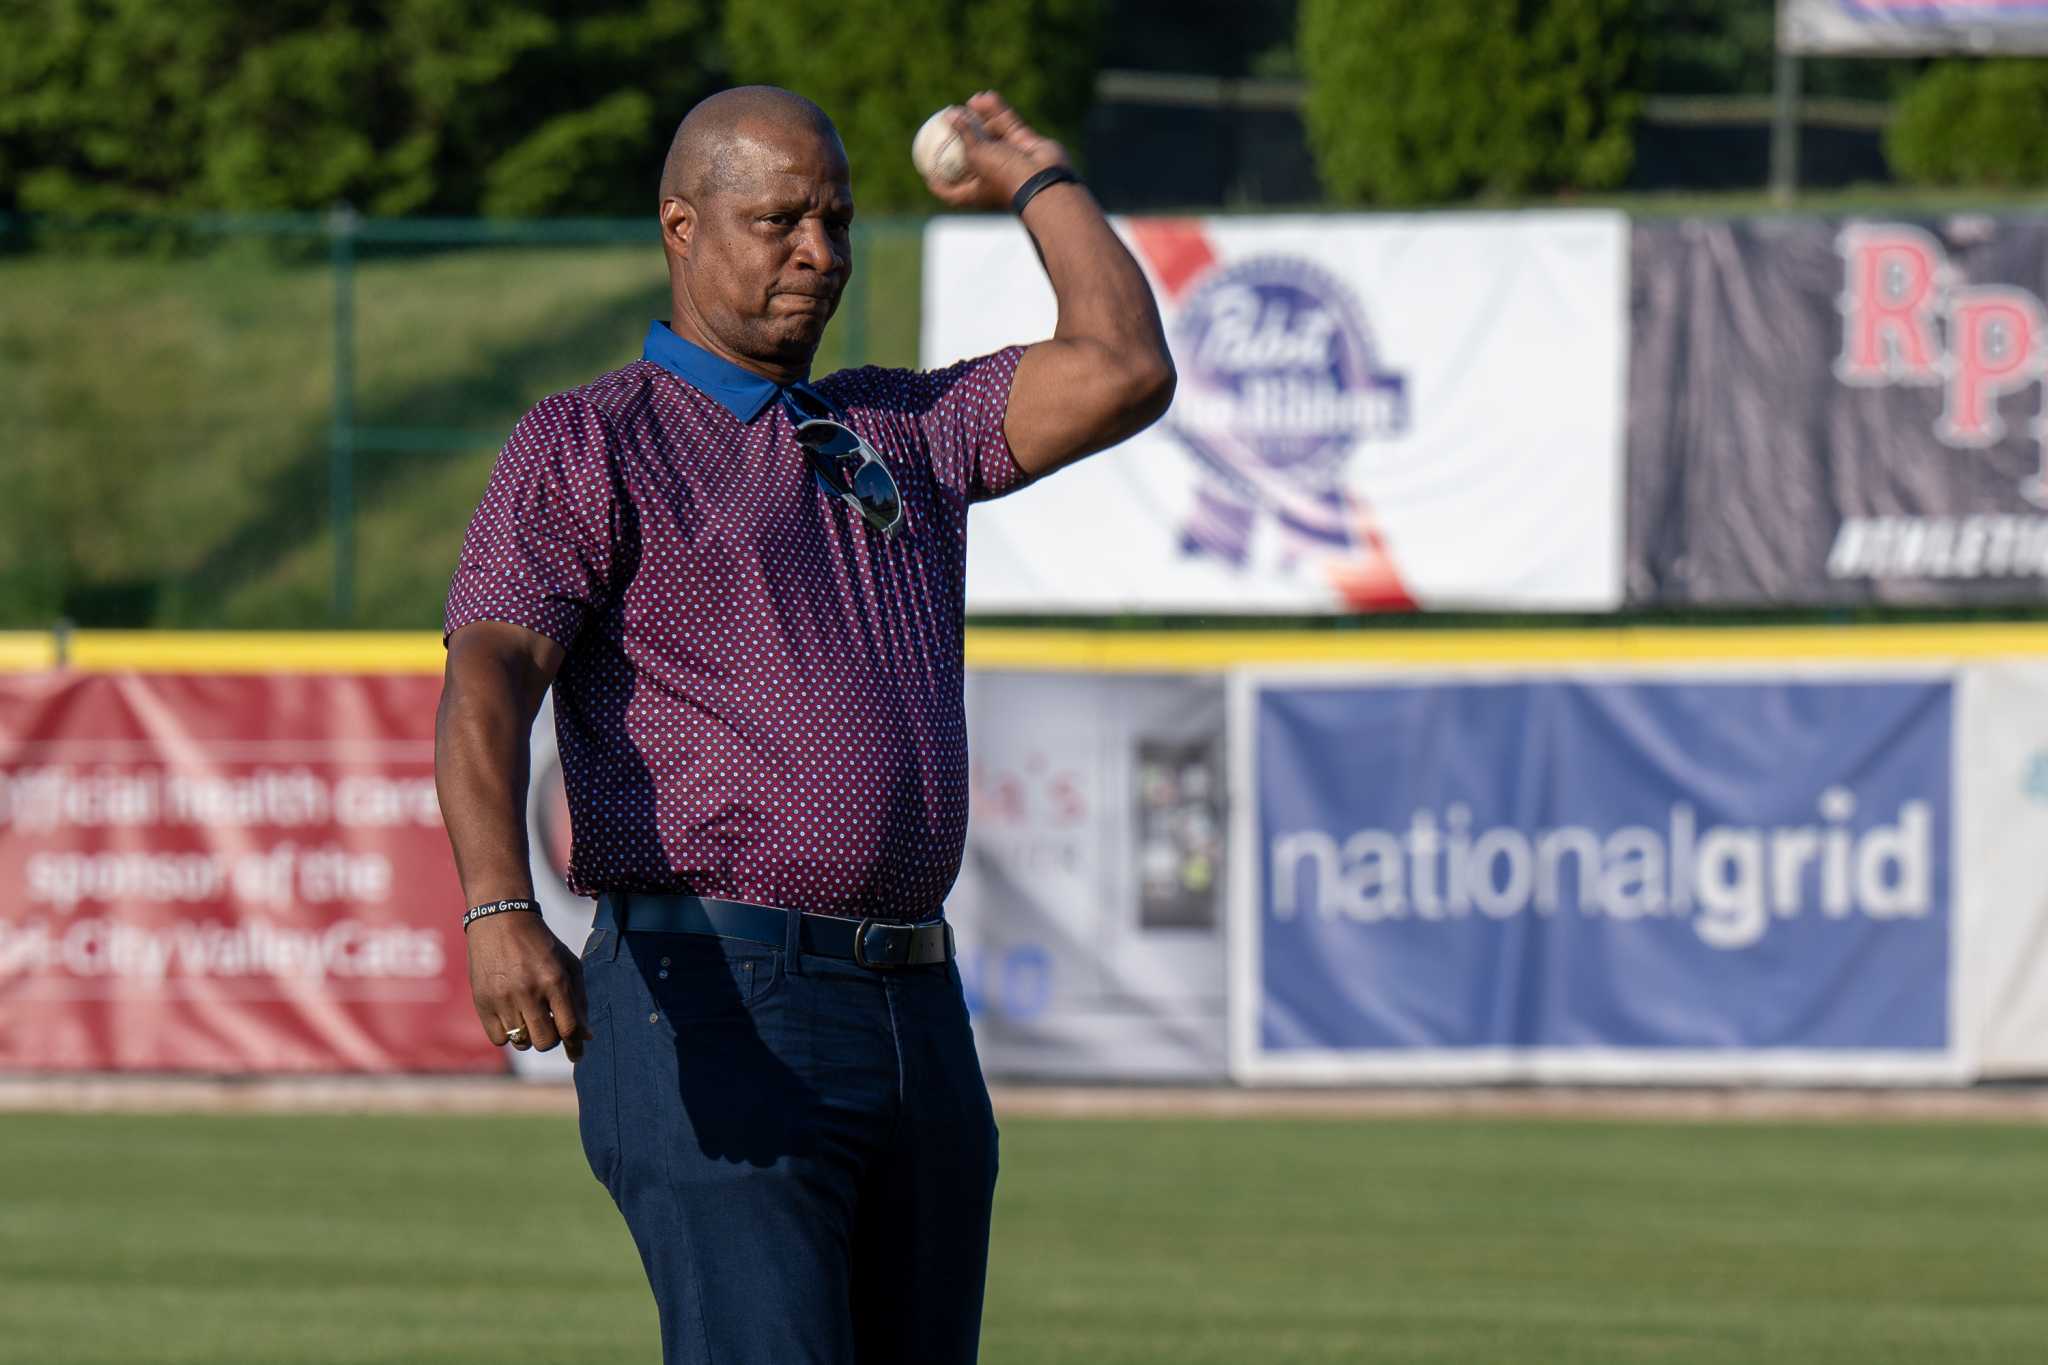 Overcomer' Darryl Strawberry appears at ValleyCats game